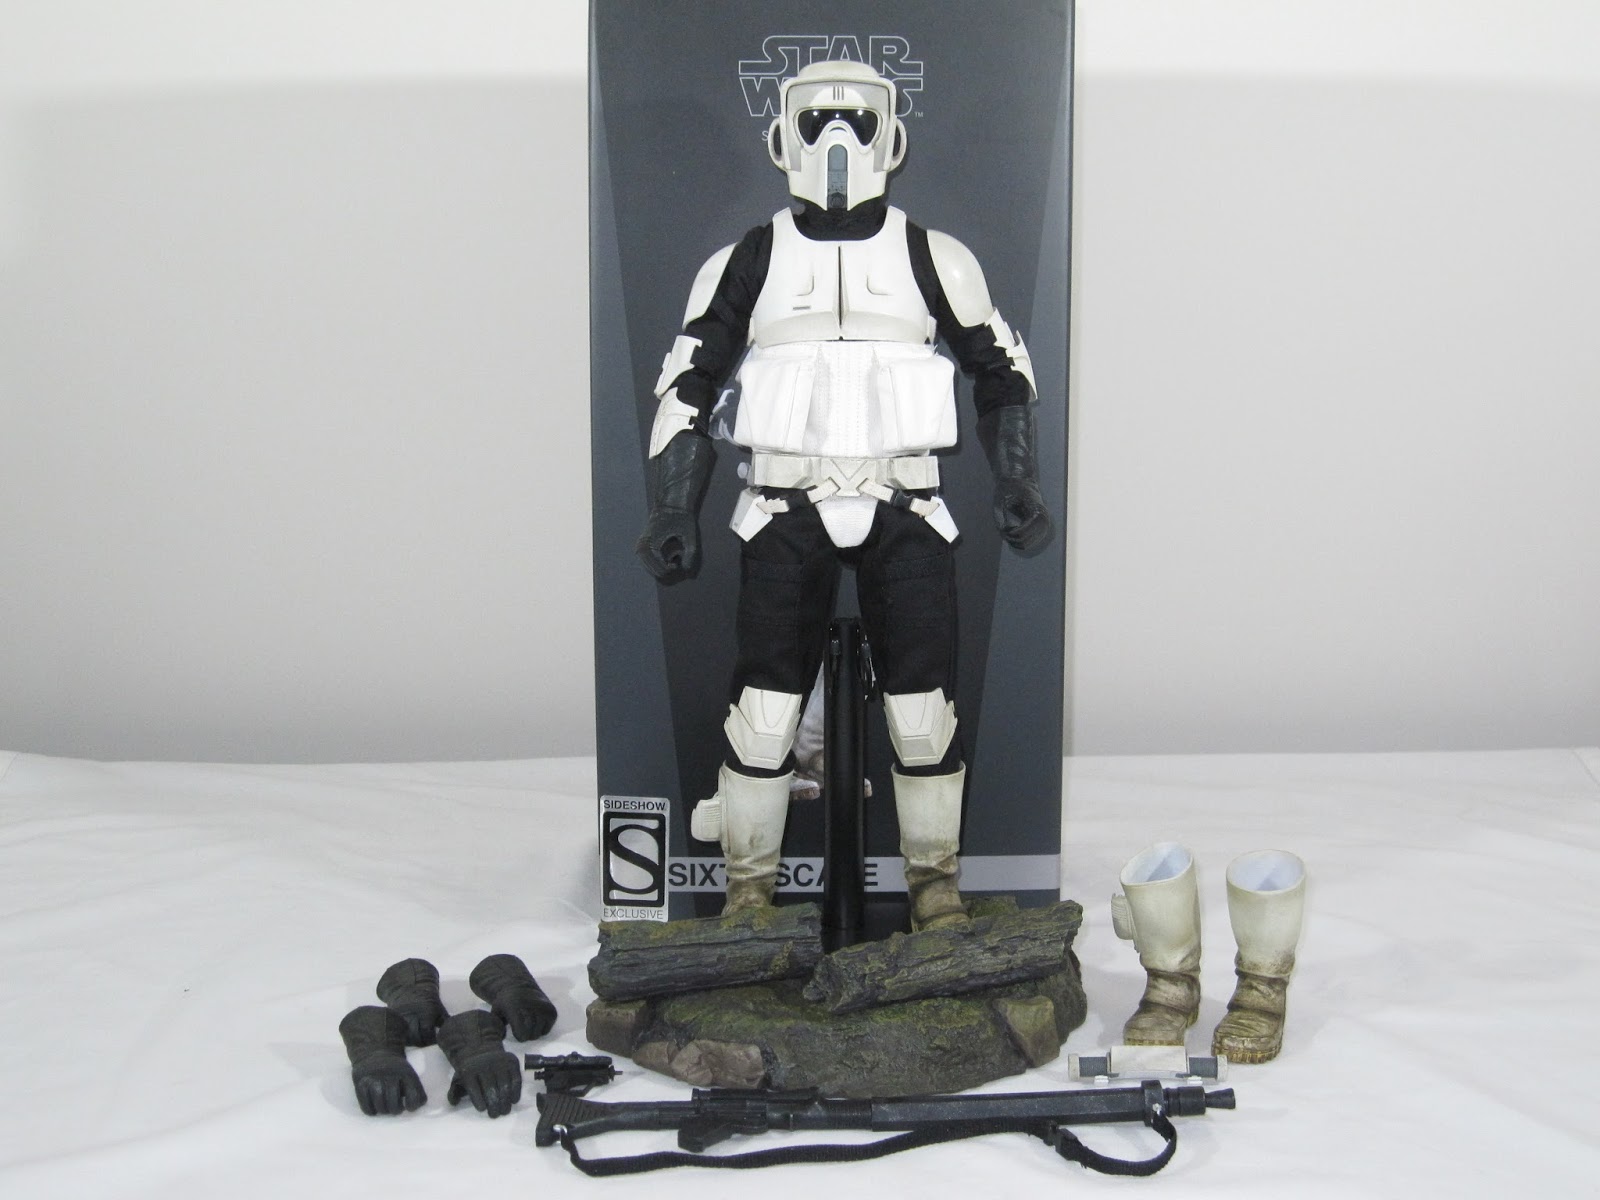 Kool Kollectibles: Sideshow Collectibles 1/6th scale Scout Trooper